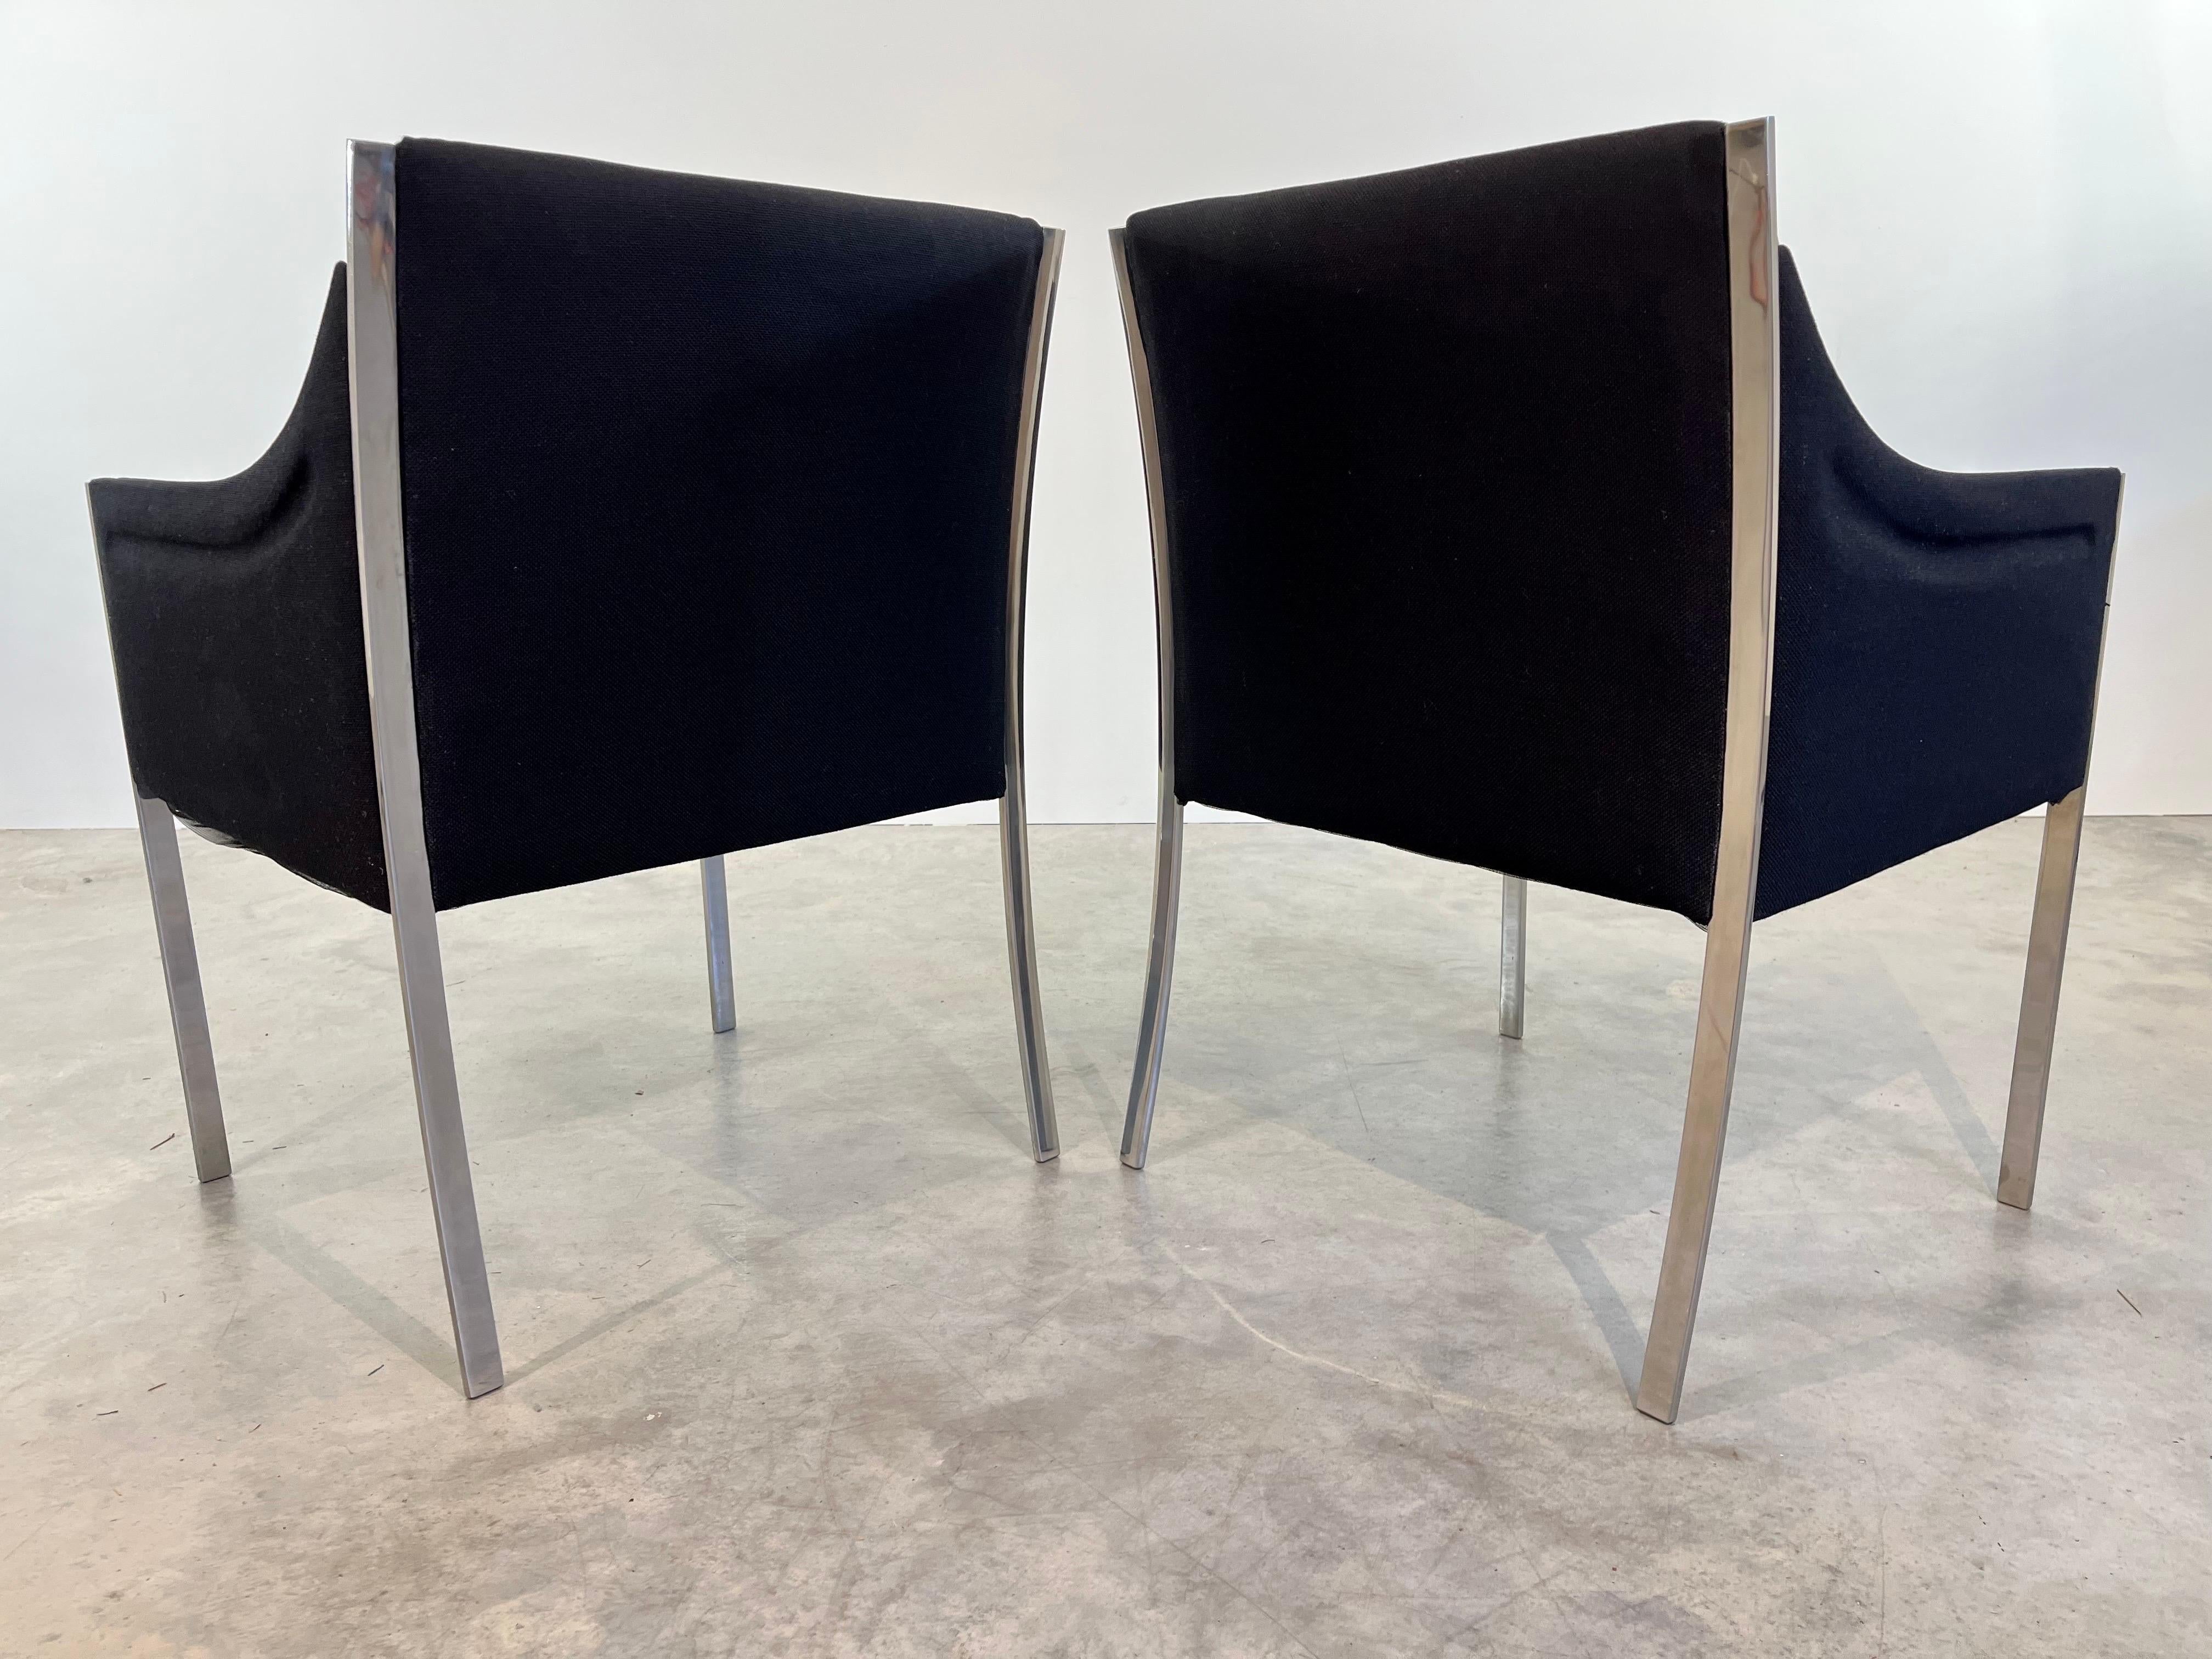 Scarce Pair of Jens Risom Sculptural Chromed Steel Lounge Chairs In Good Condition For Sale In Southampton, NJ